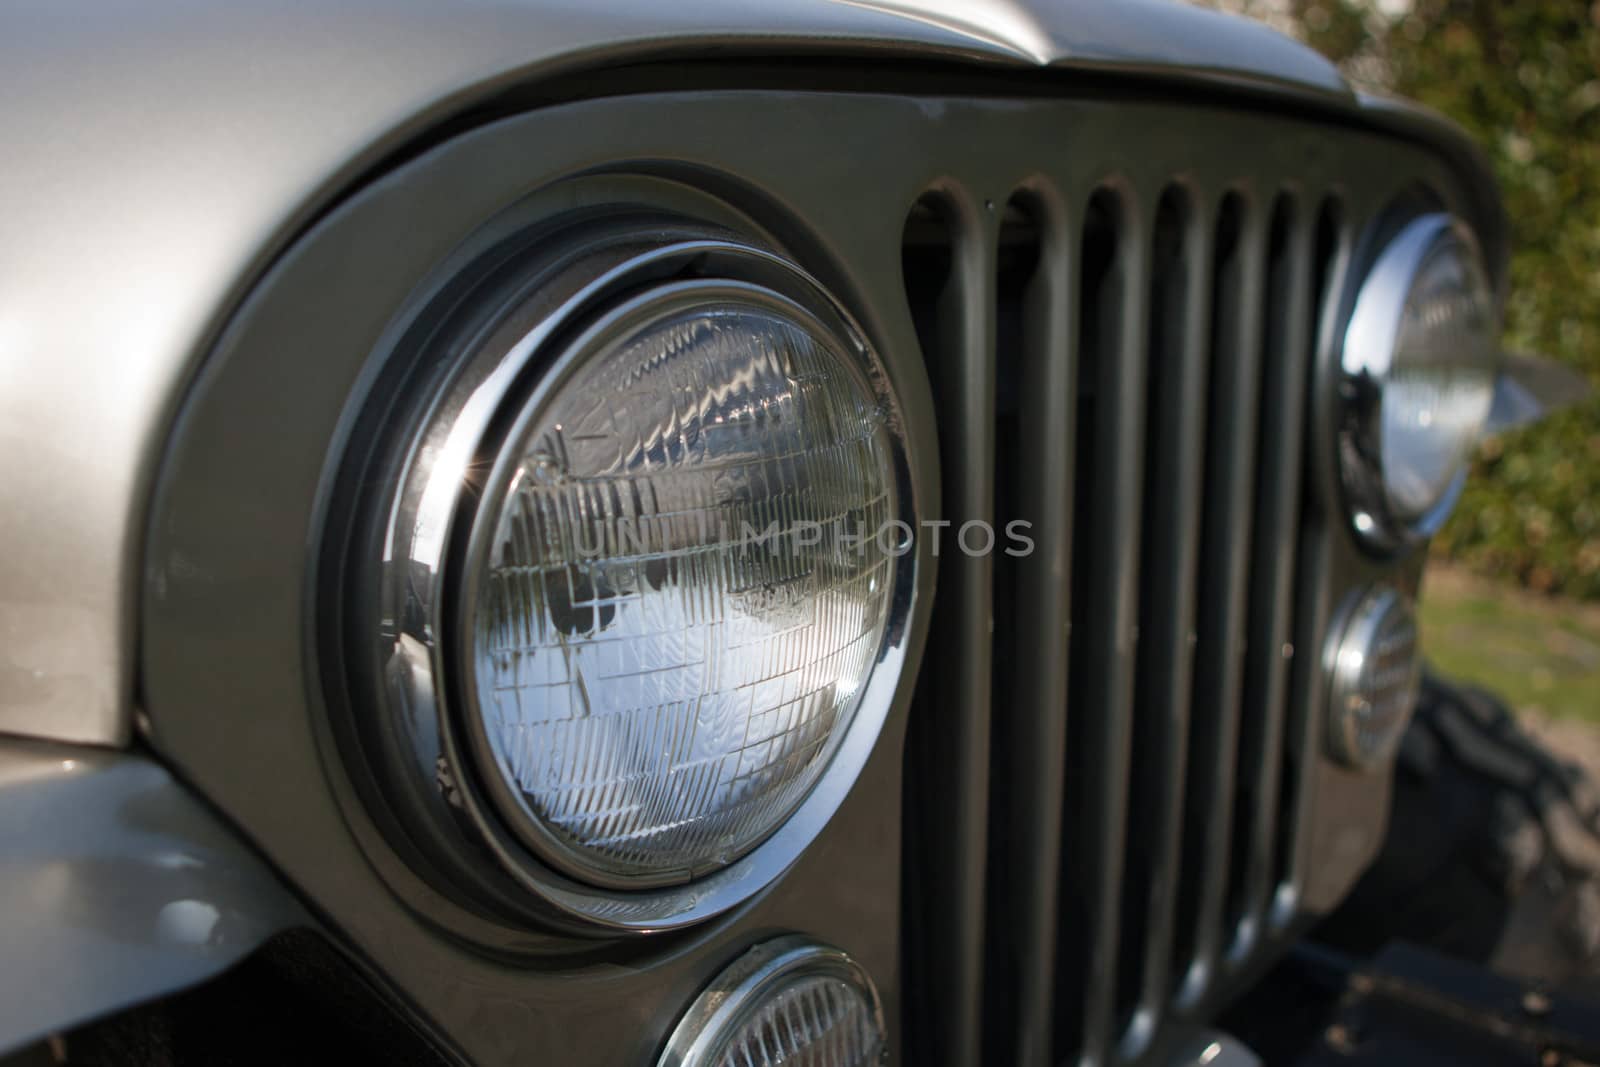 Front end, headlights and grille on a vintage four-wheel drive vehicle.